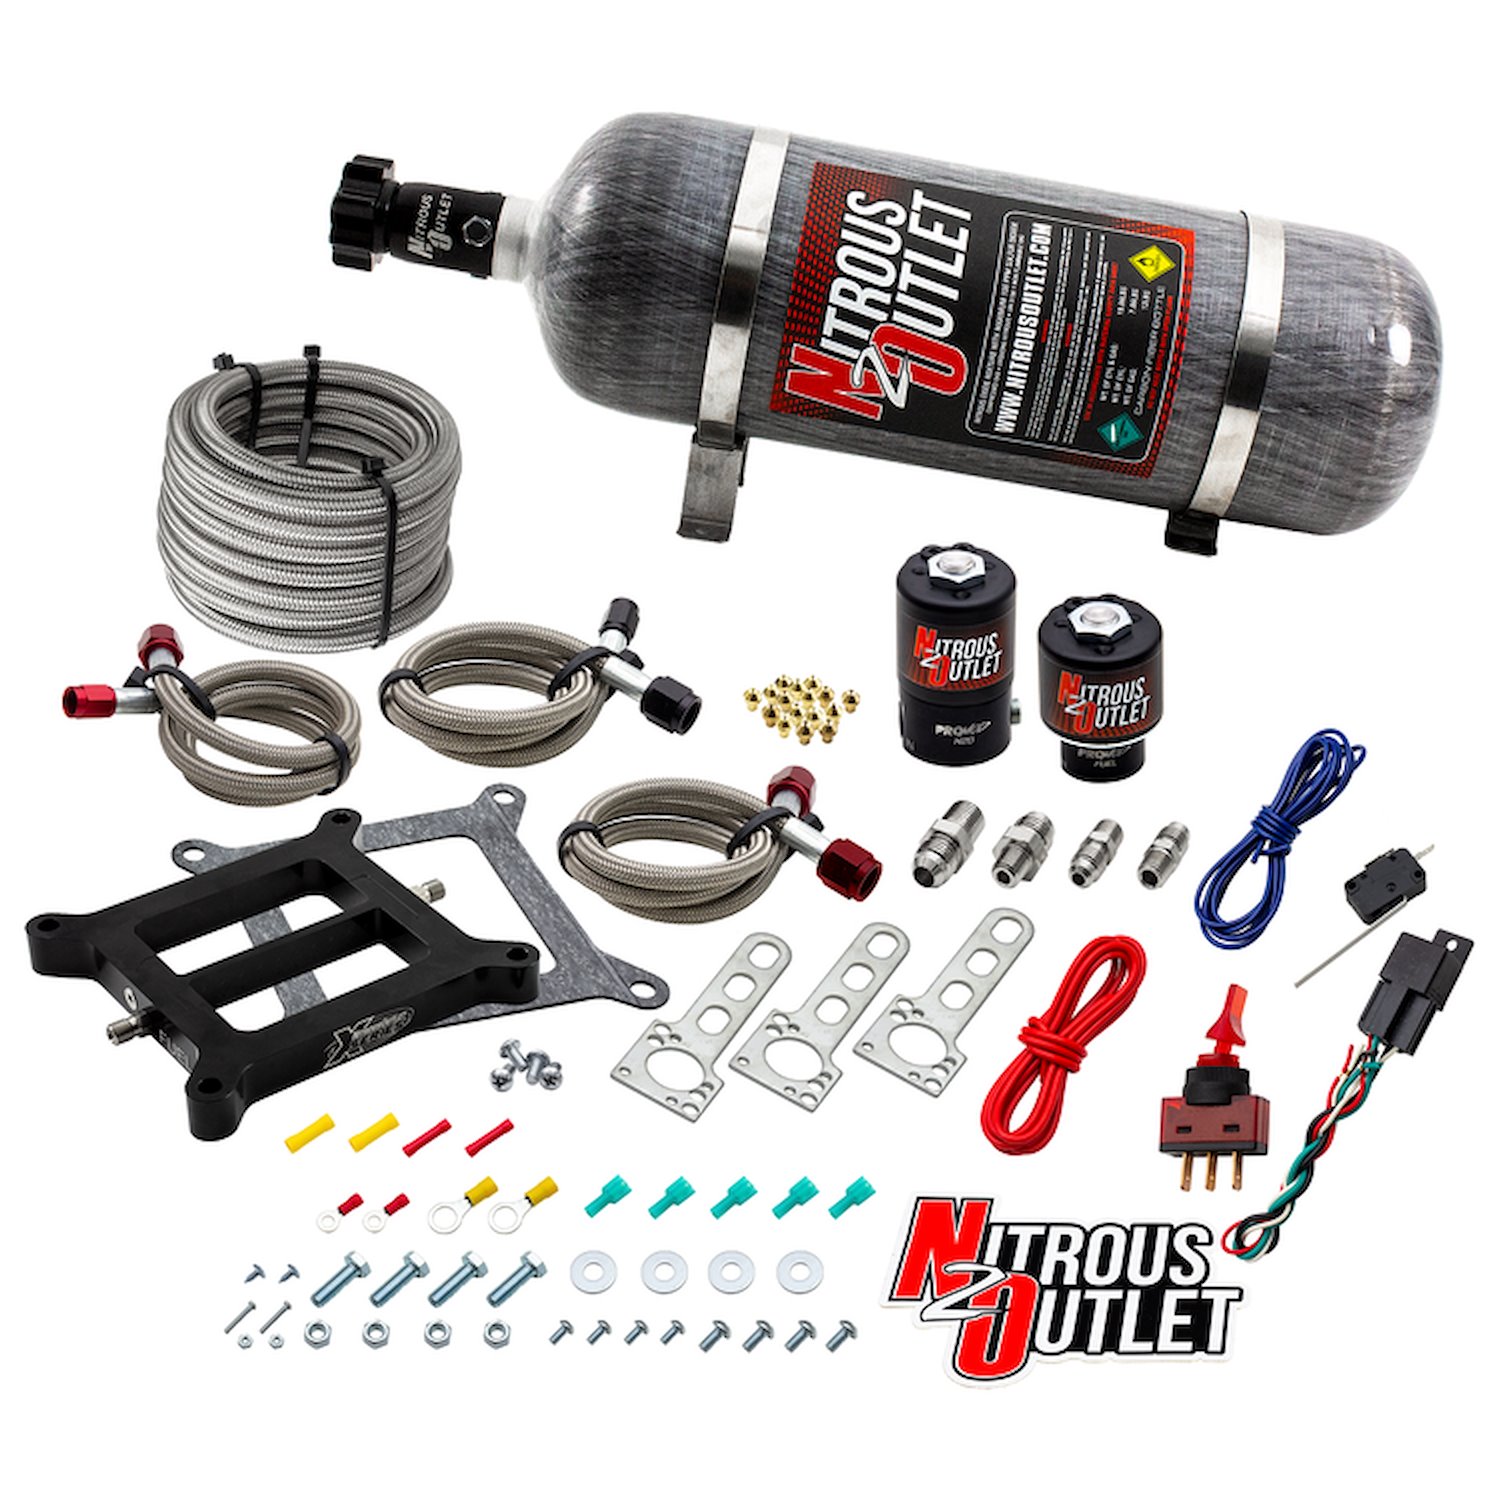 00-10070-12 Weekend Warrior 4150 Plate System, Gas/E85, 5-55psi, 100-350 HP, 12LB Bottle